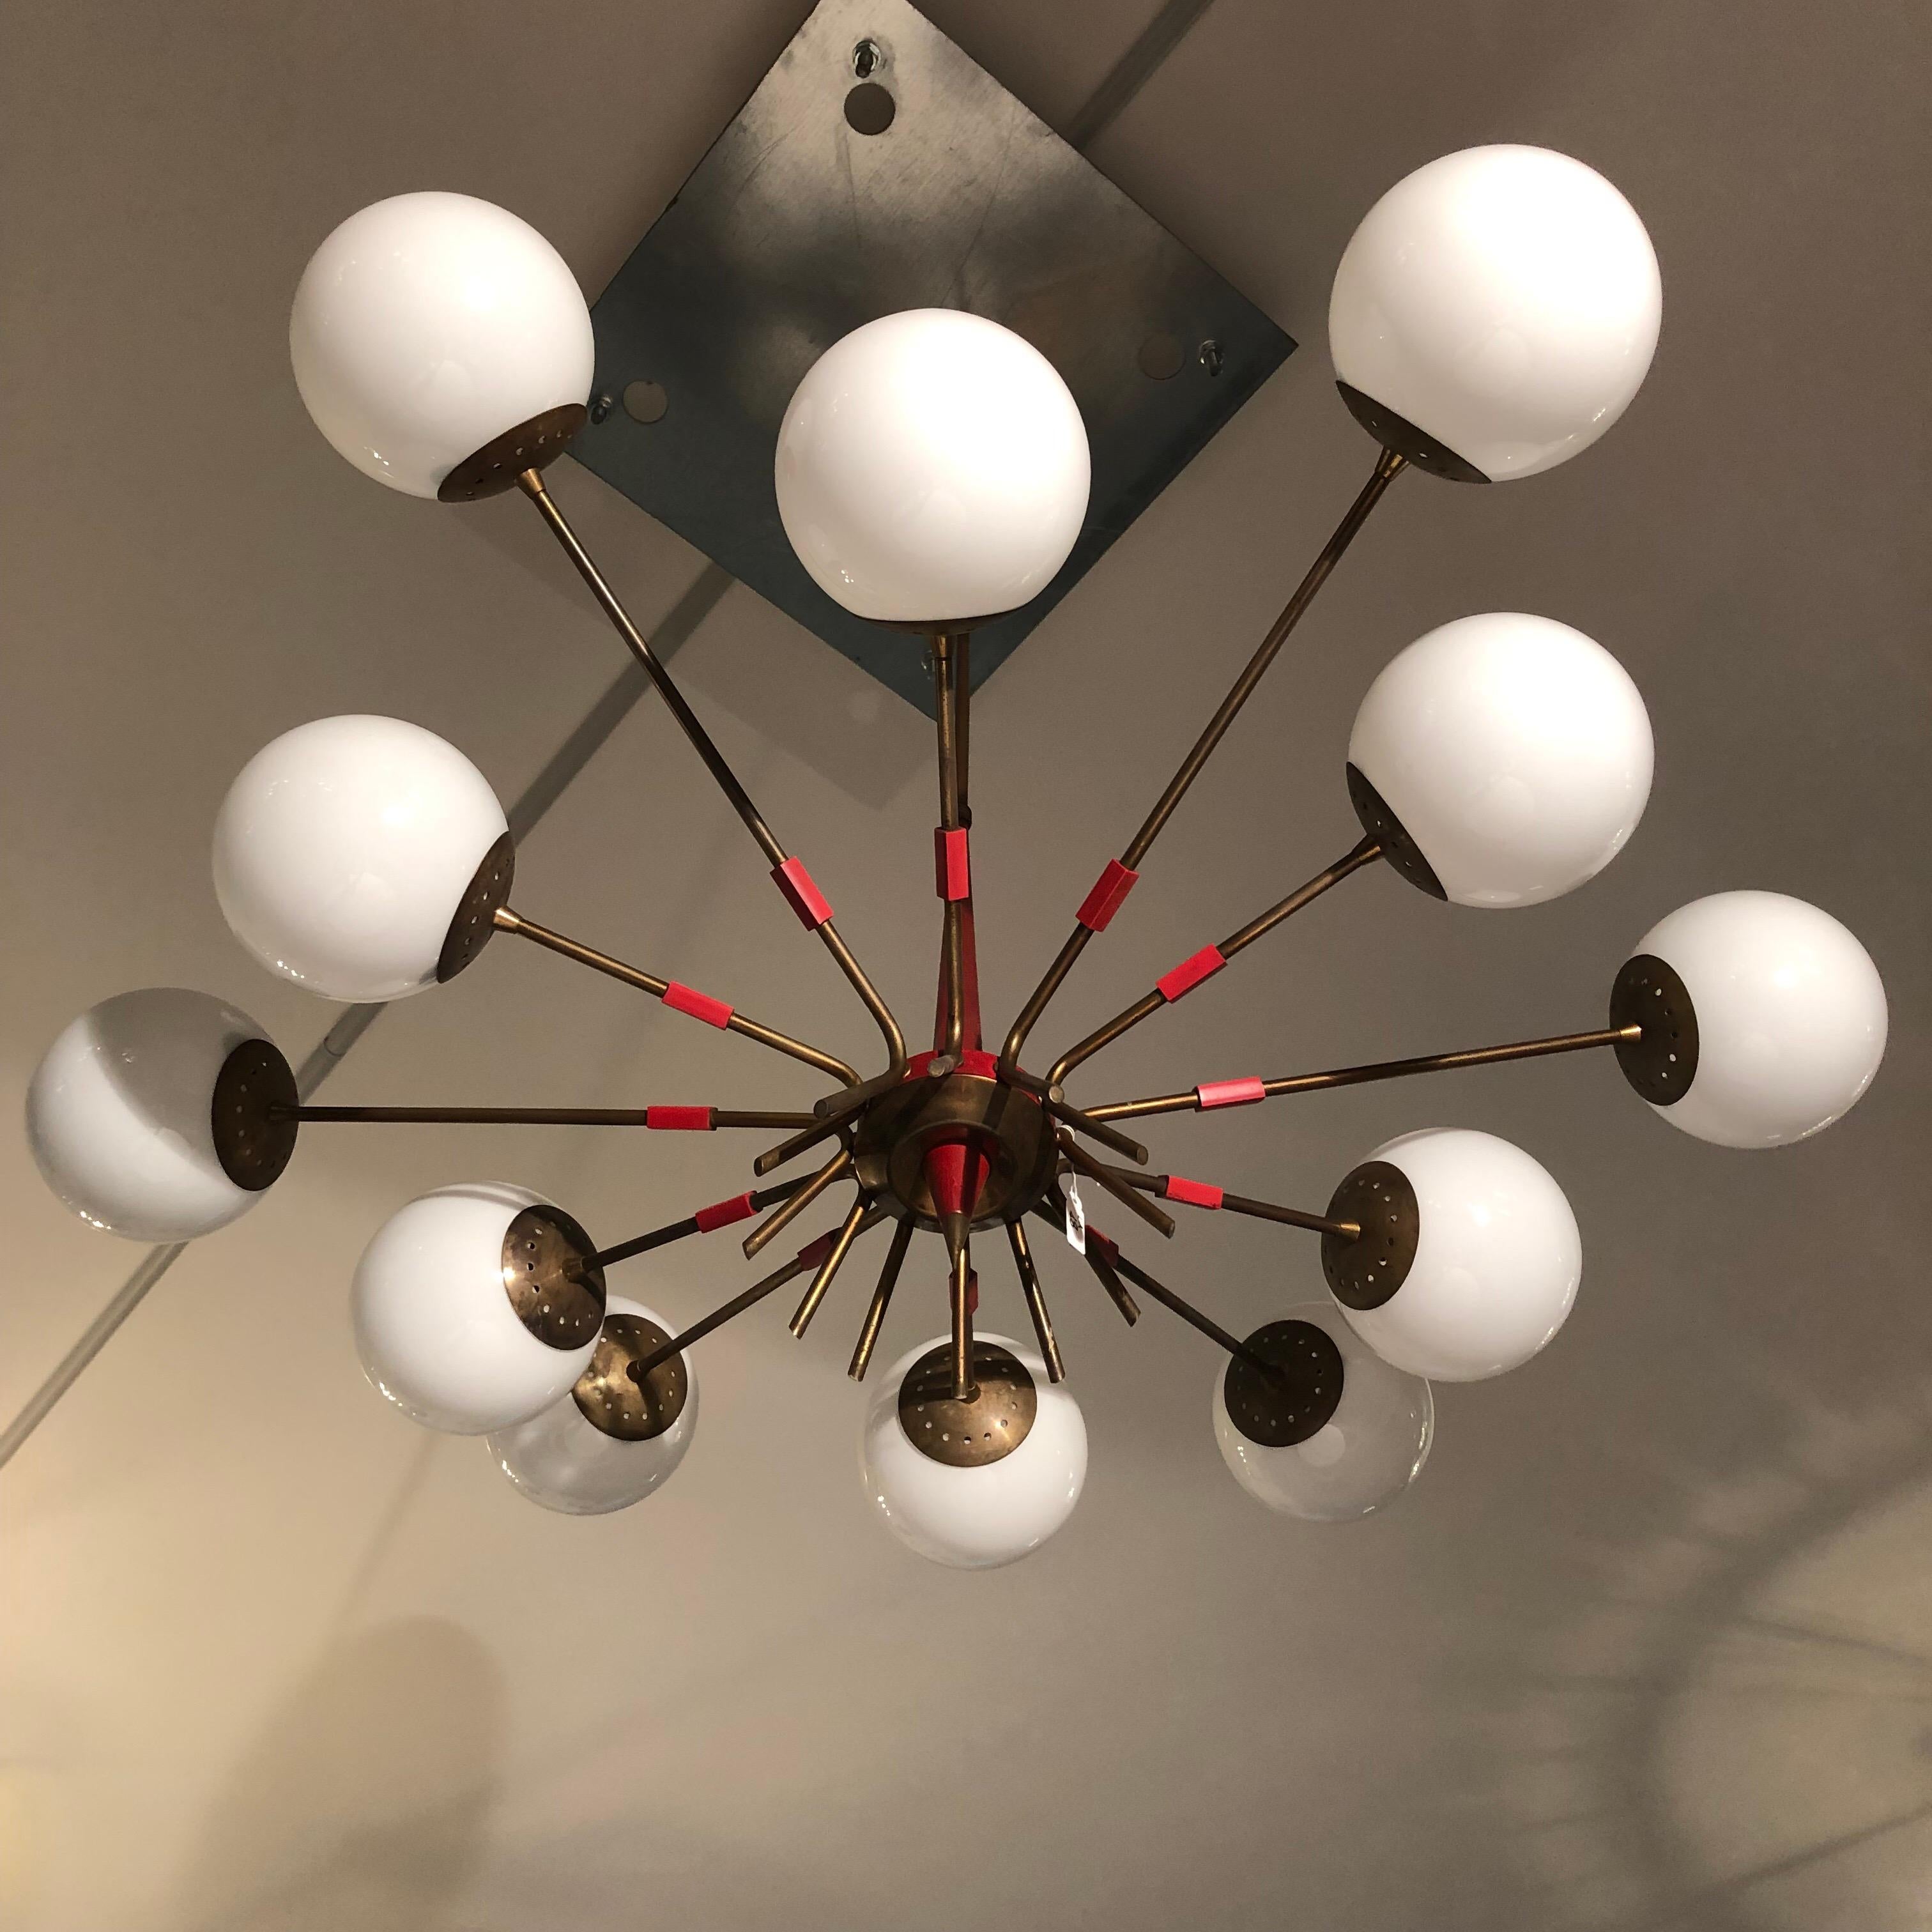 Italian midcentury chandelier by Stilnovo. 12 lights with E14 socket. Very good original vintage conditions. Brass, lacquered metal and opaline glass. Measures: Diameter 100 cm, total height with rod 103 cm. Glasses in perfect conditions, brass with